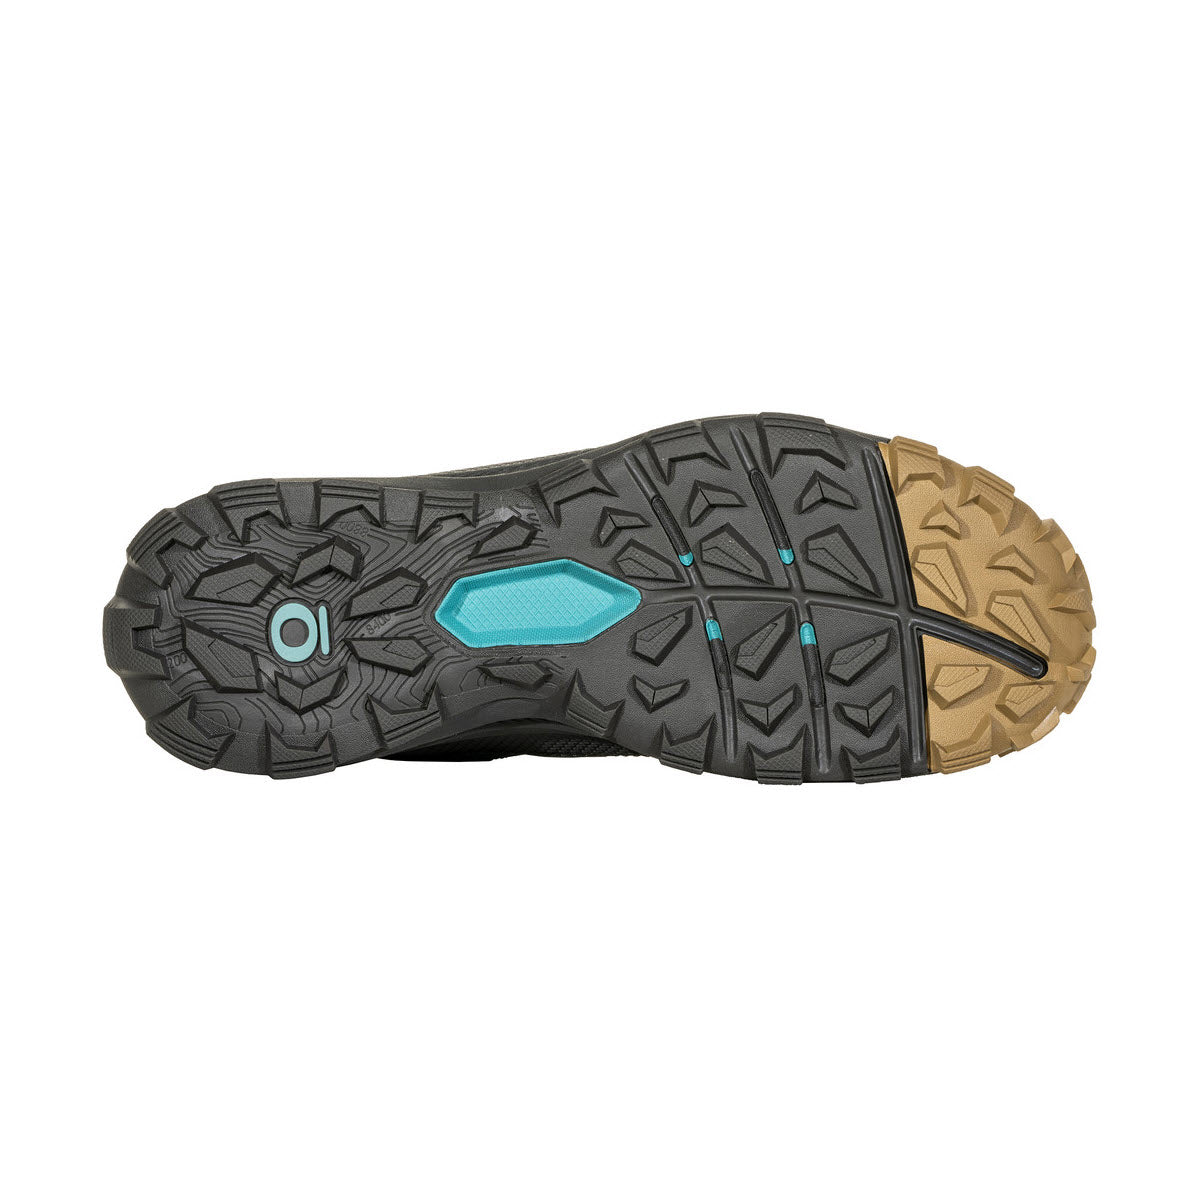 Bottom view of a Oboz Katabatic Mid B-Dry Island hiking boot sole featuring a multi-colored tread pattern in black, gray, and tan with blue accents, designed for breathability and waterproof protection.